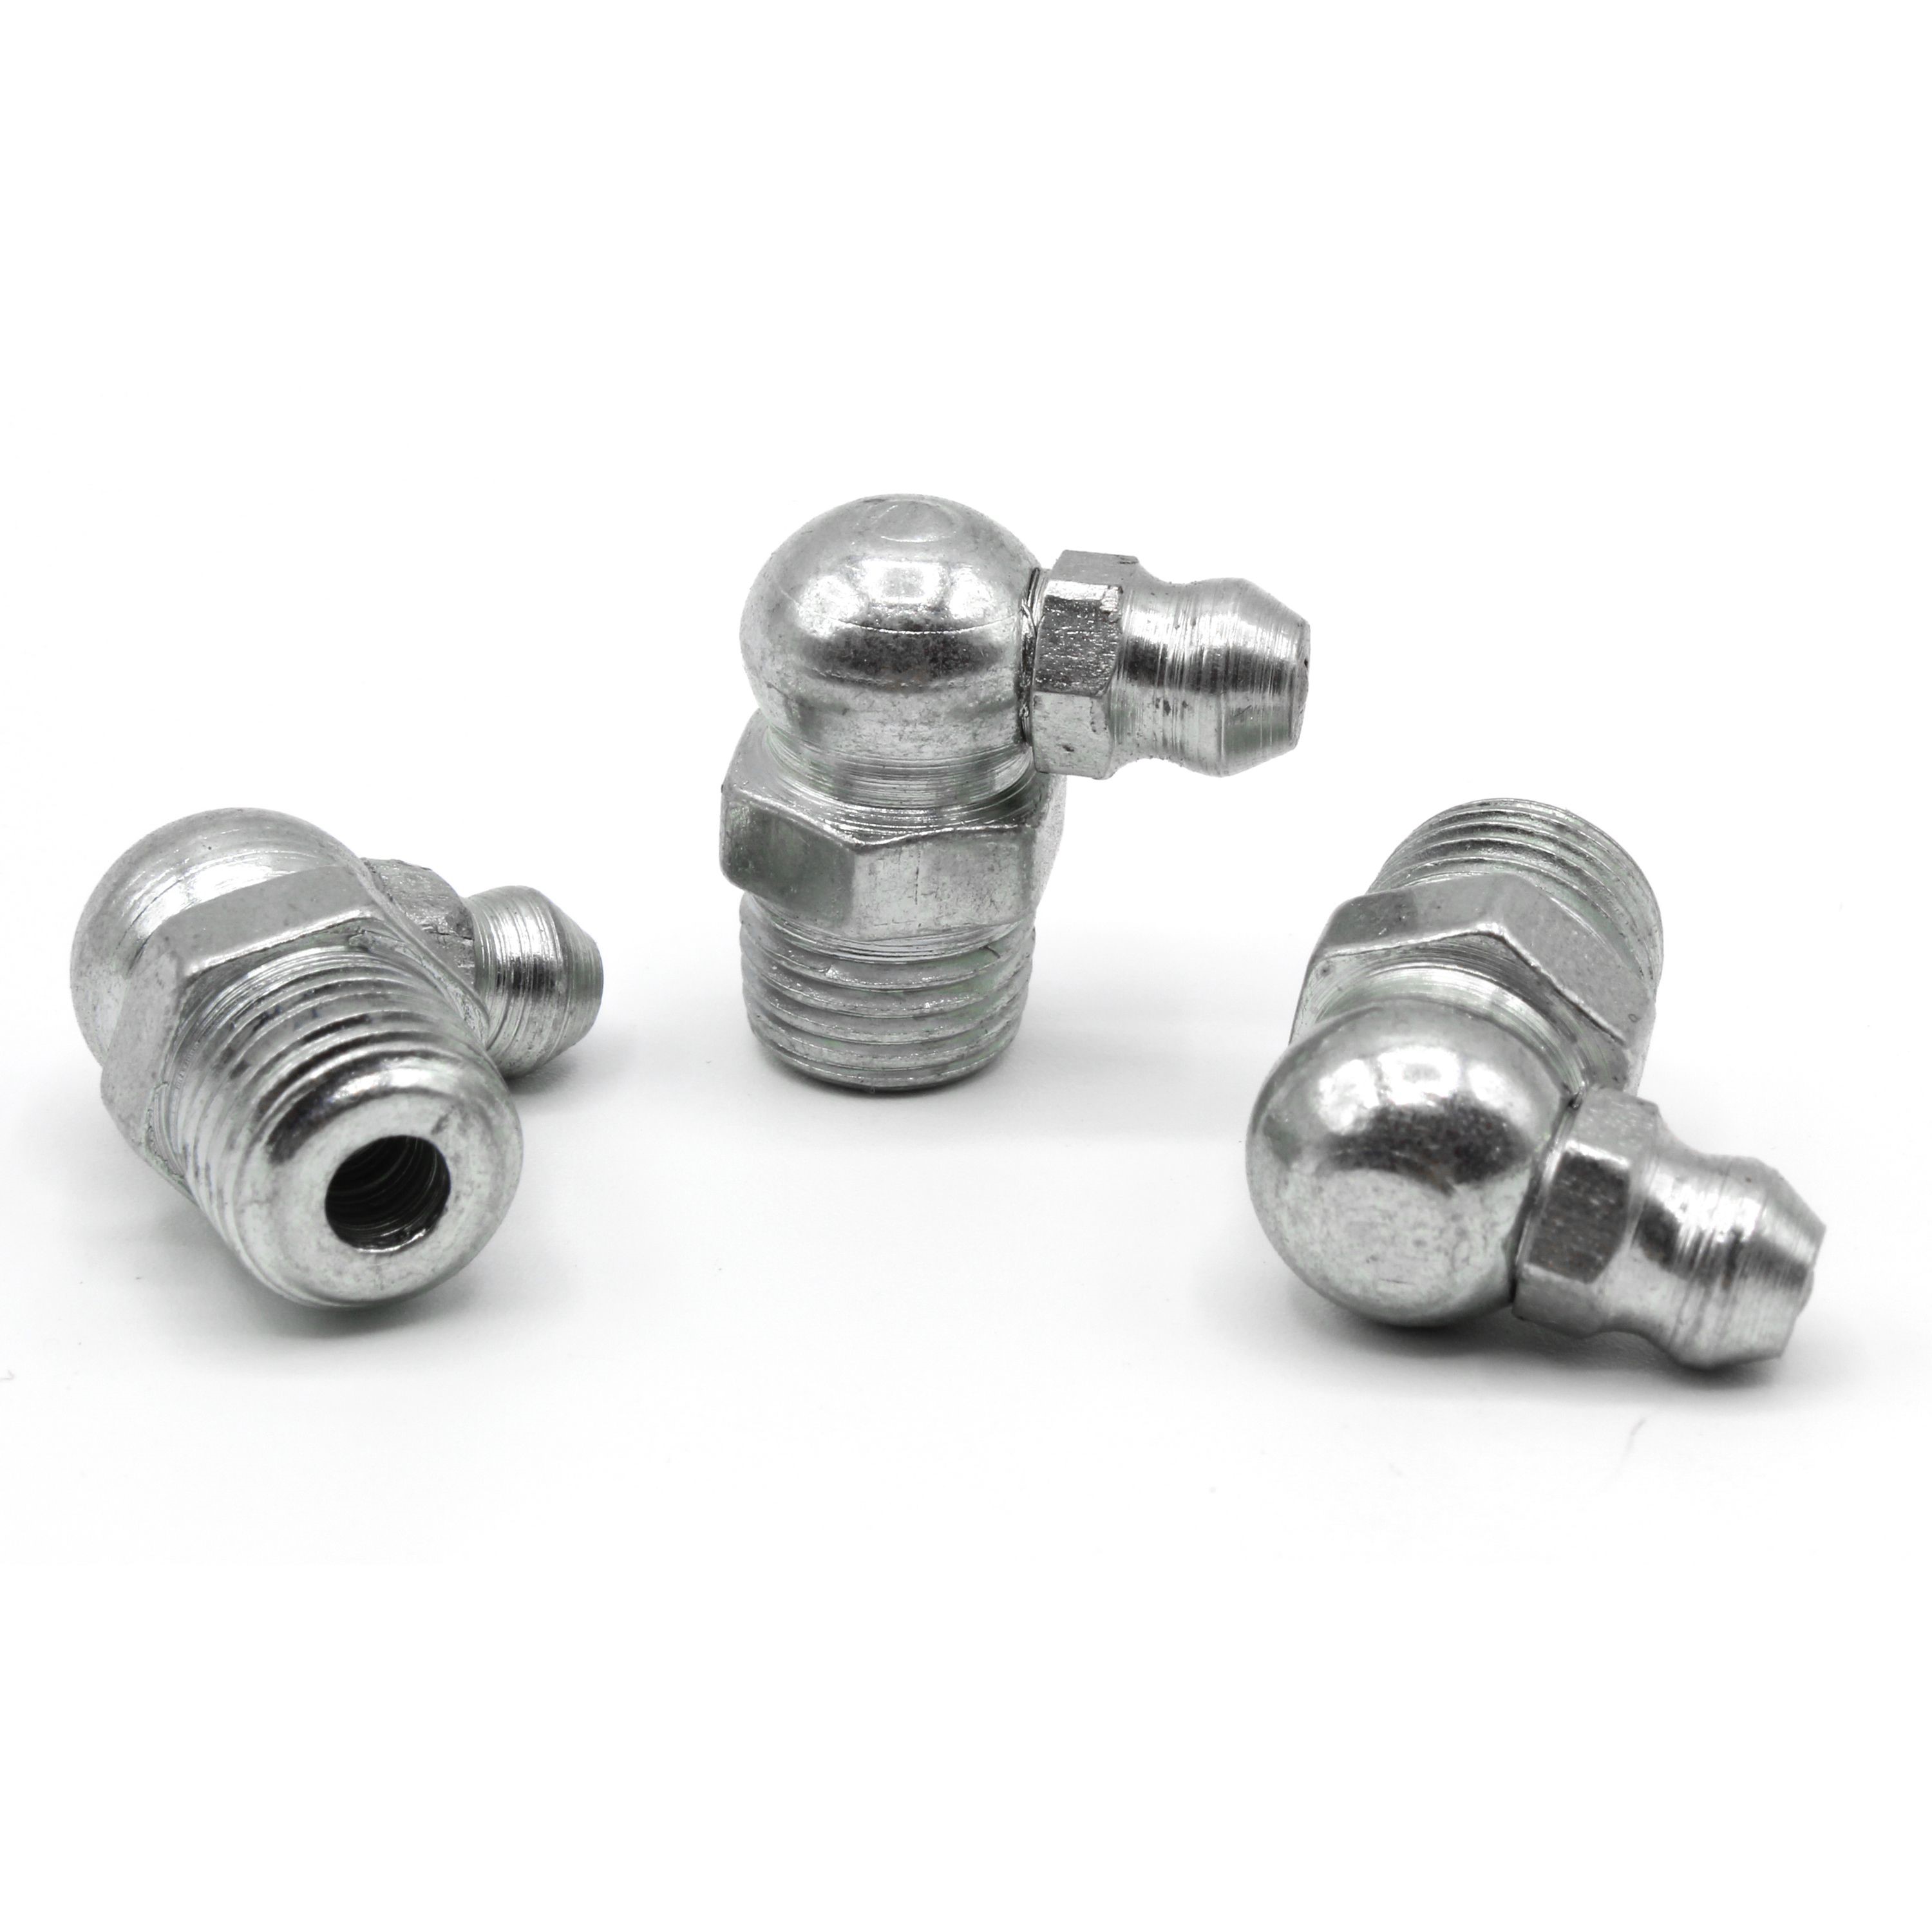 Grease nipple M10 angled 90° (10 pieces) Tapered grease nipple Hydraulic grease nipple Grease nipple